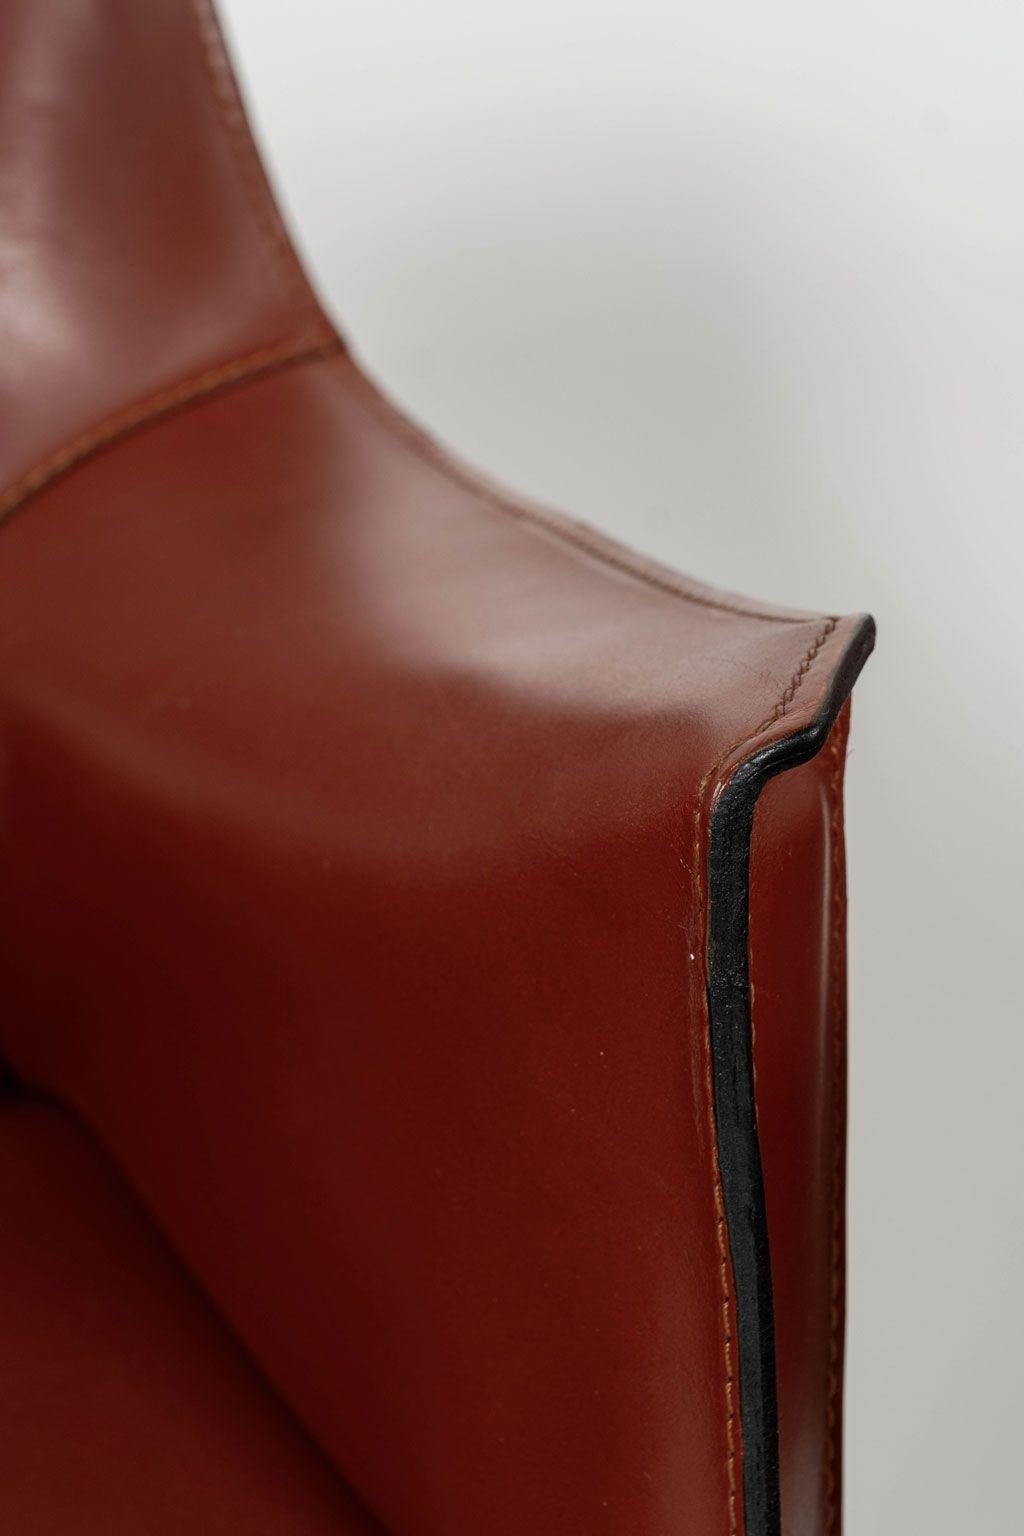 Eight Mario Bellini Cab 413 armchairs in rosso cina finish, fabricated by Cassina in the 1980s. Flexible steel frame covered with a skin of high quality saddle leather. This elegant, versatile chair is equally suitable for the dining room, study or